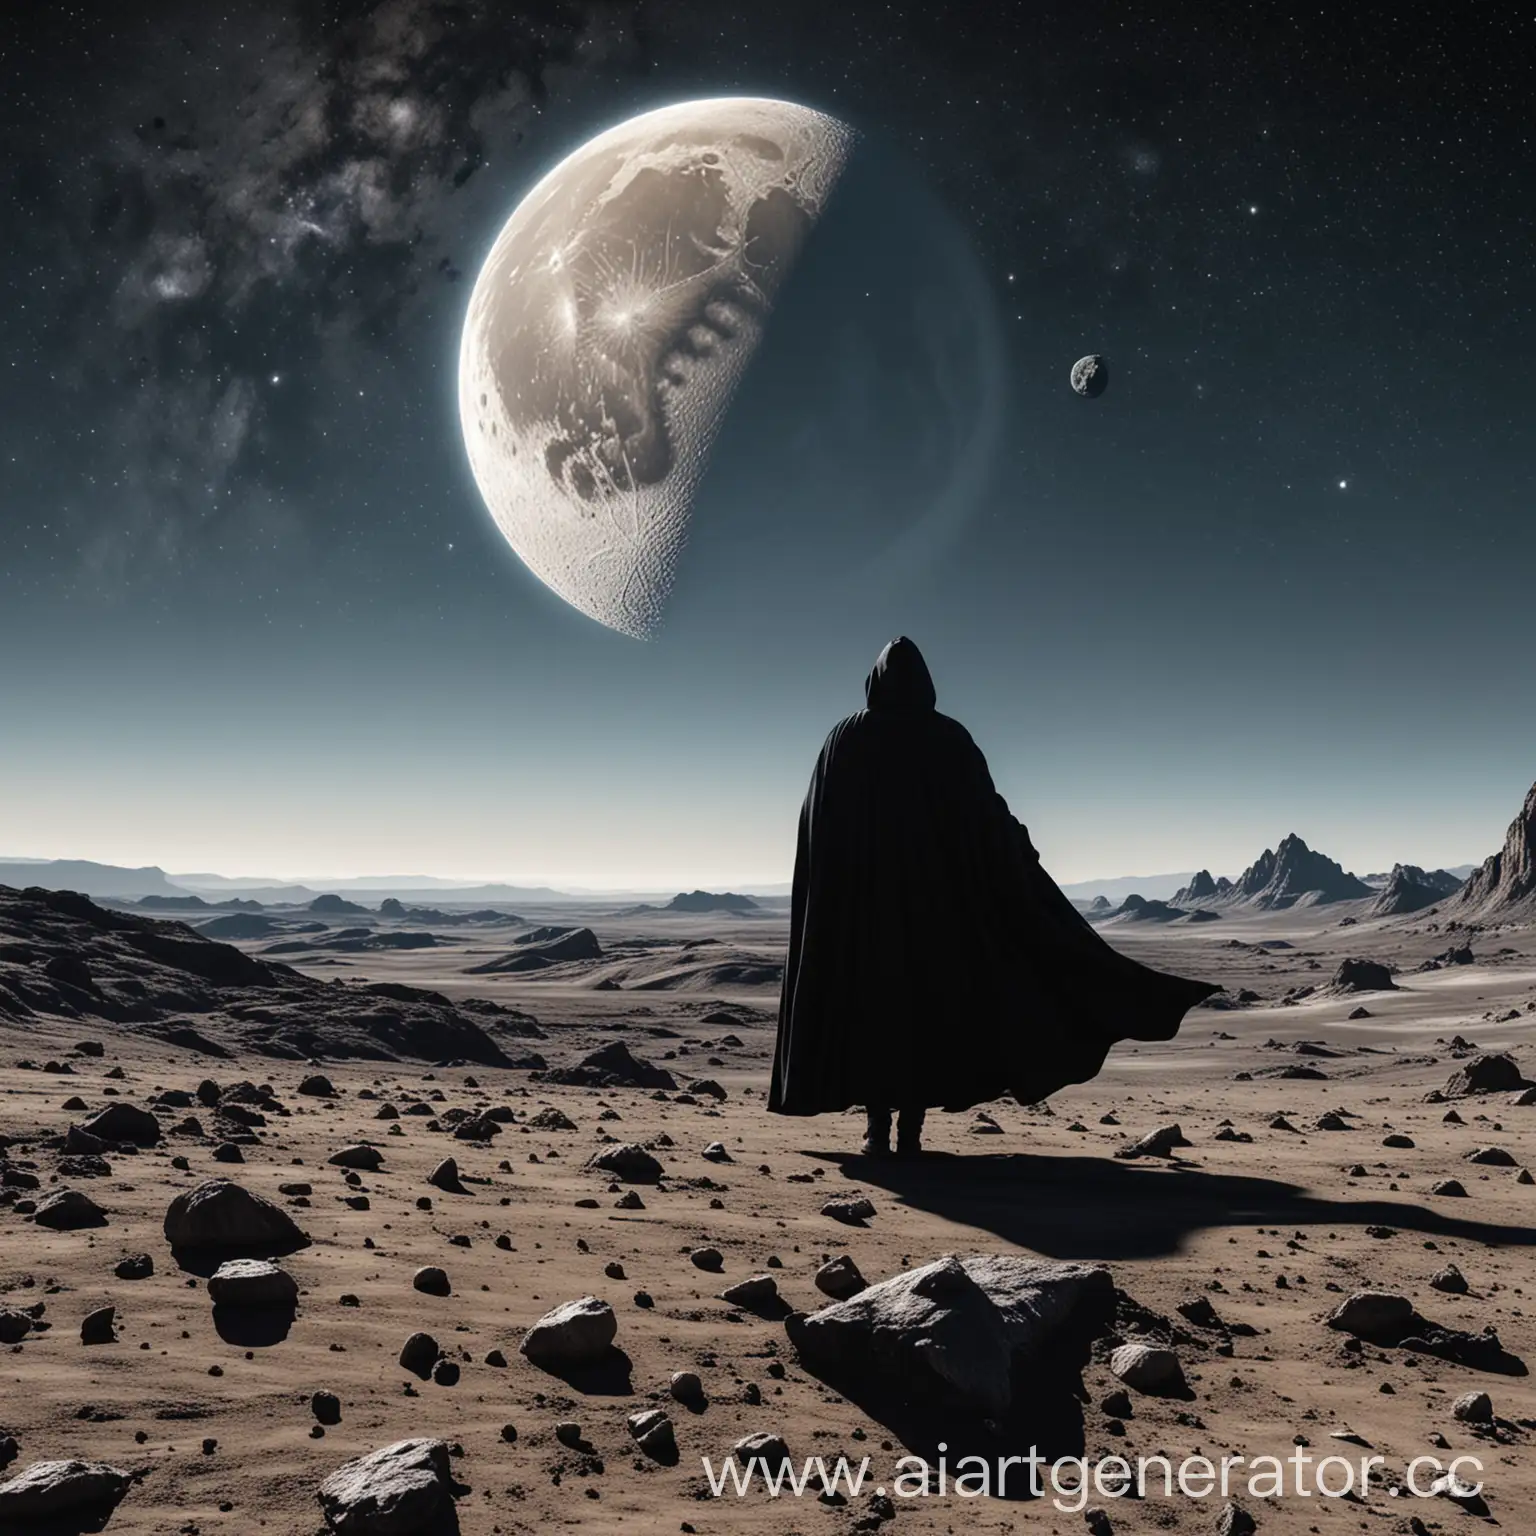 Mystical-Figure-in-Black-Cloak-on-Moon-with-Meteorites-and-Earth-View